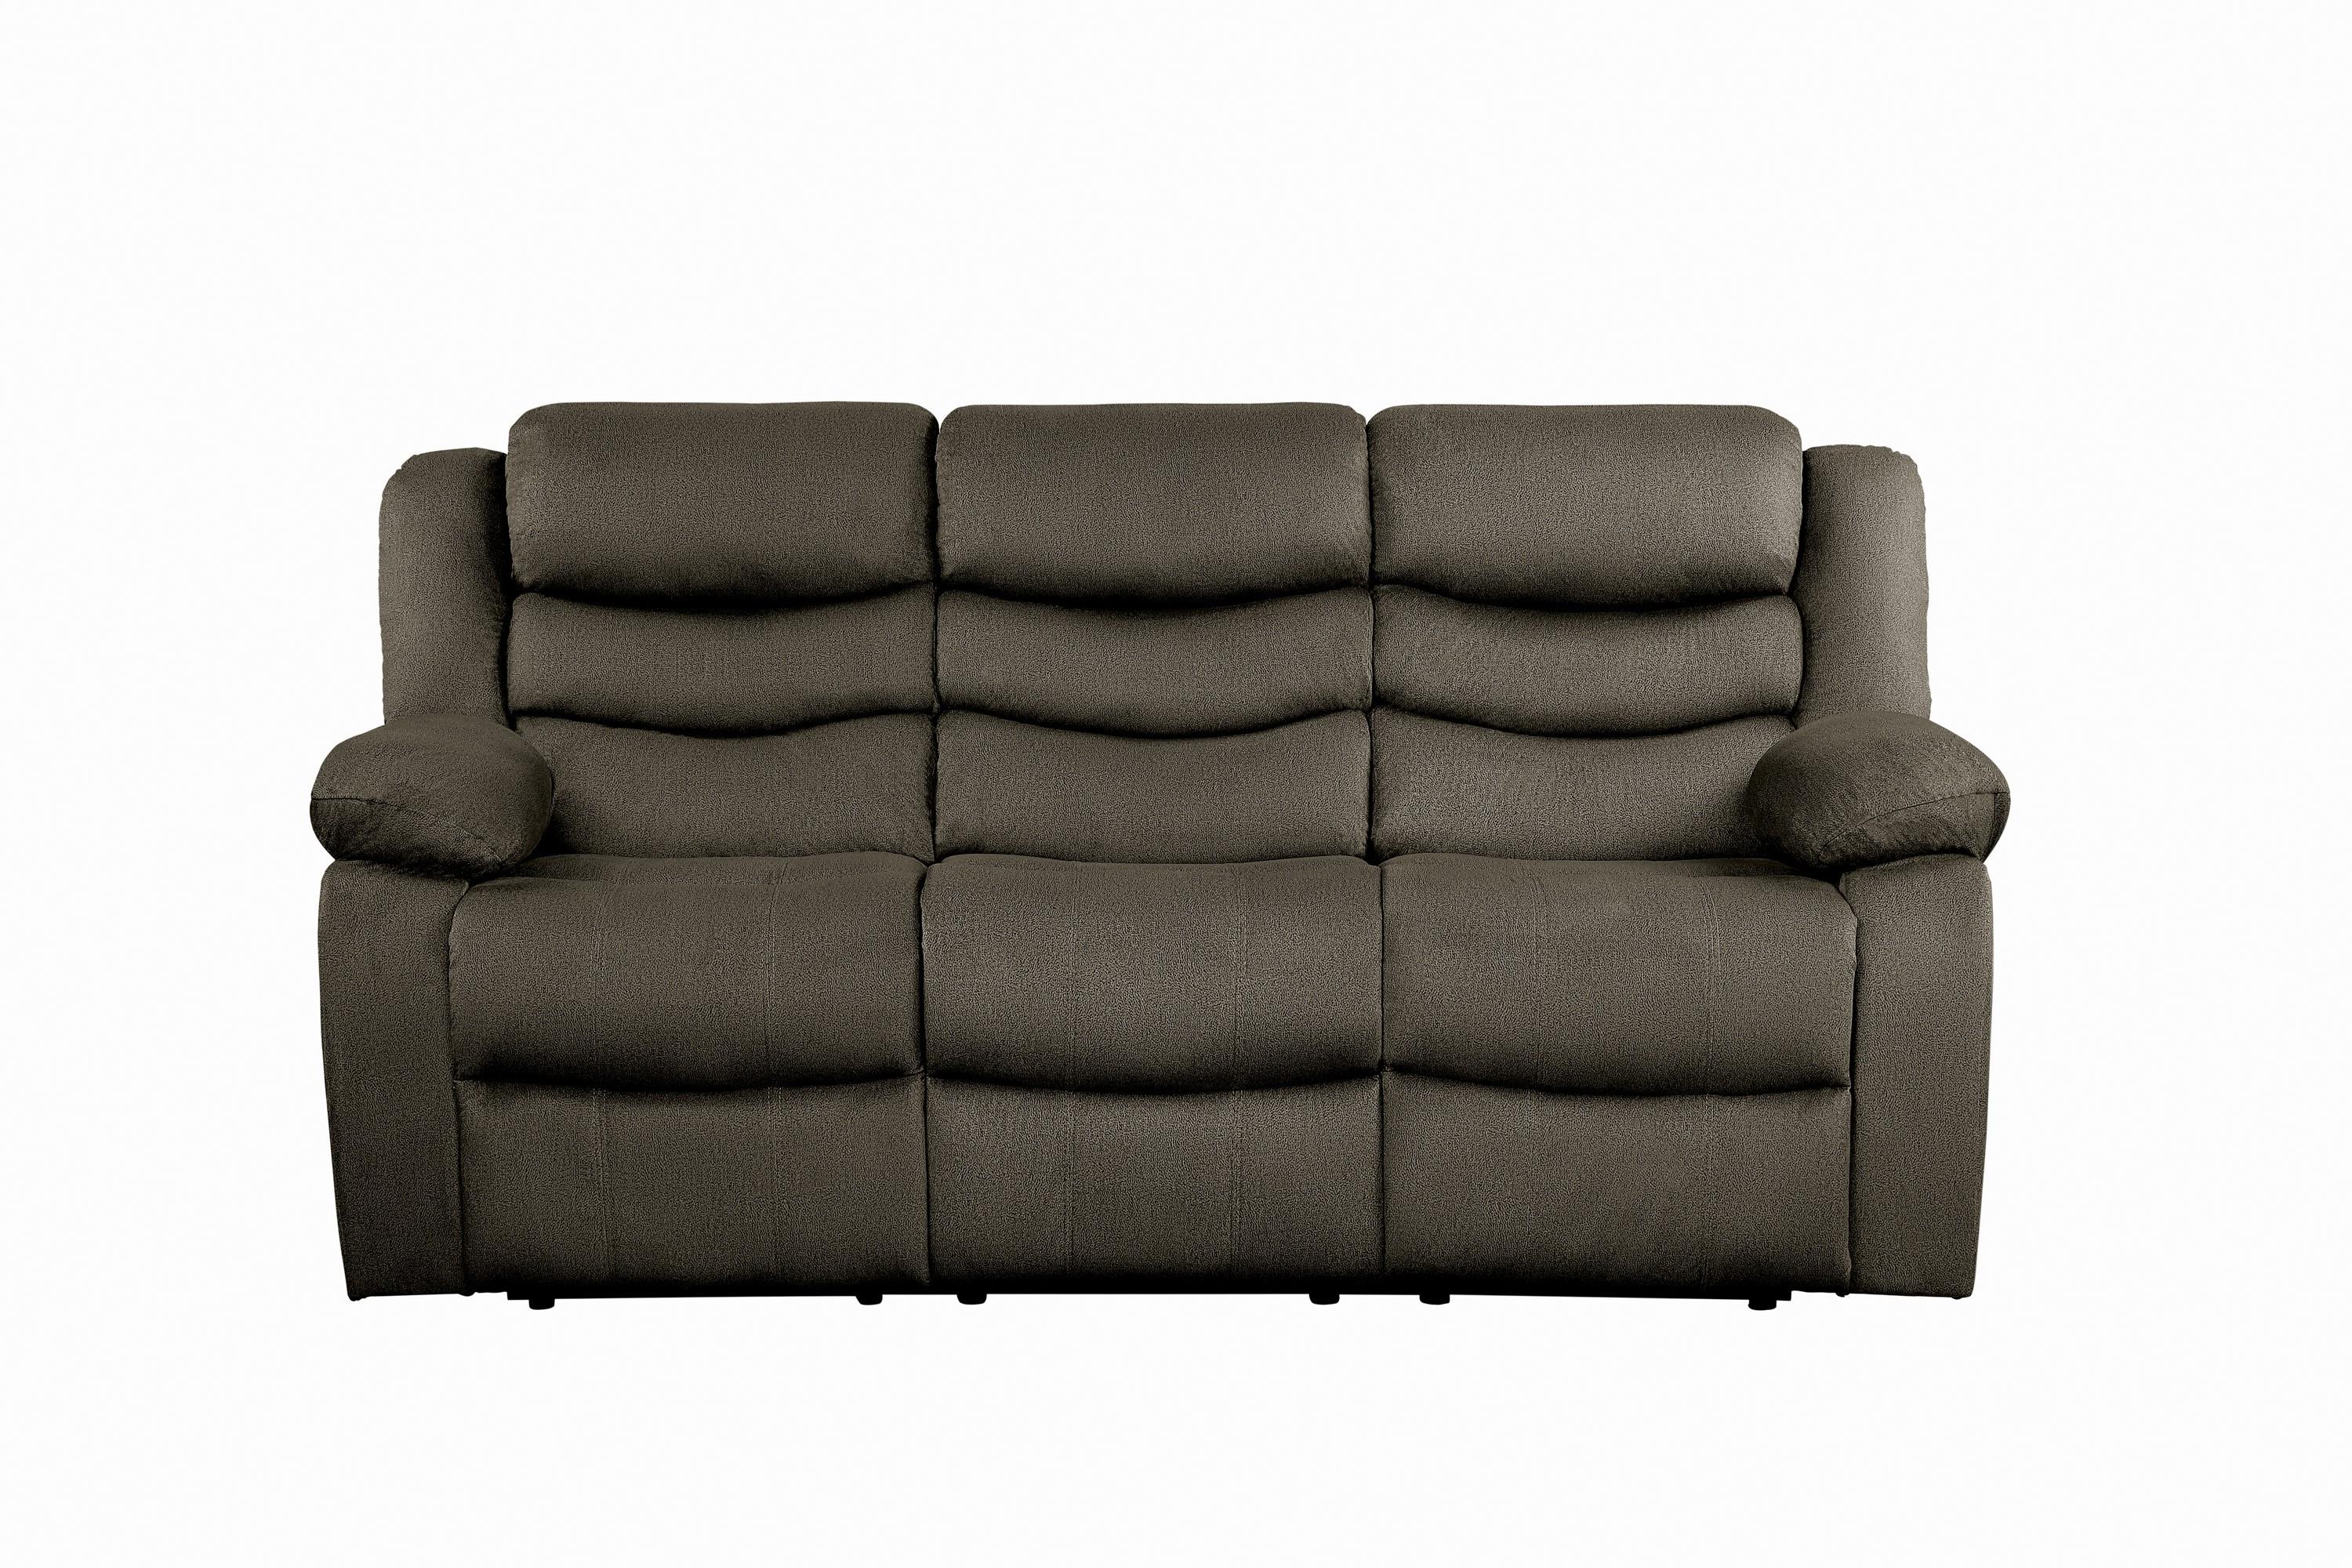 Transitional Reclining Sofa 9526BR-3 Discus 9526BR-3 in Brown Microfiber